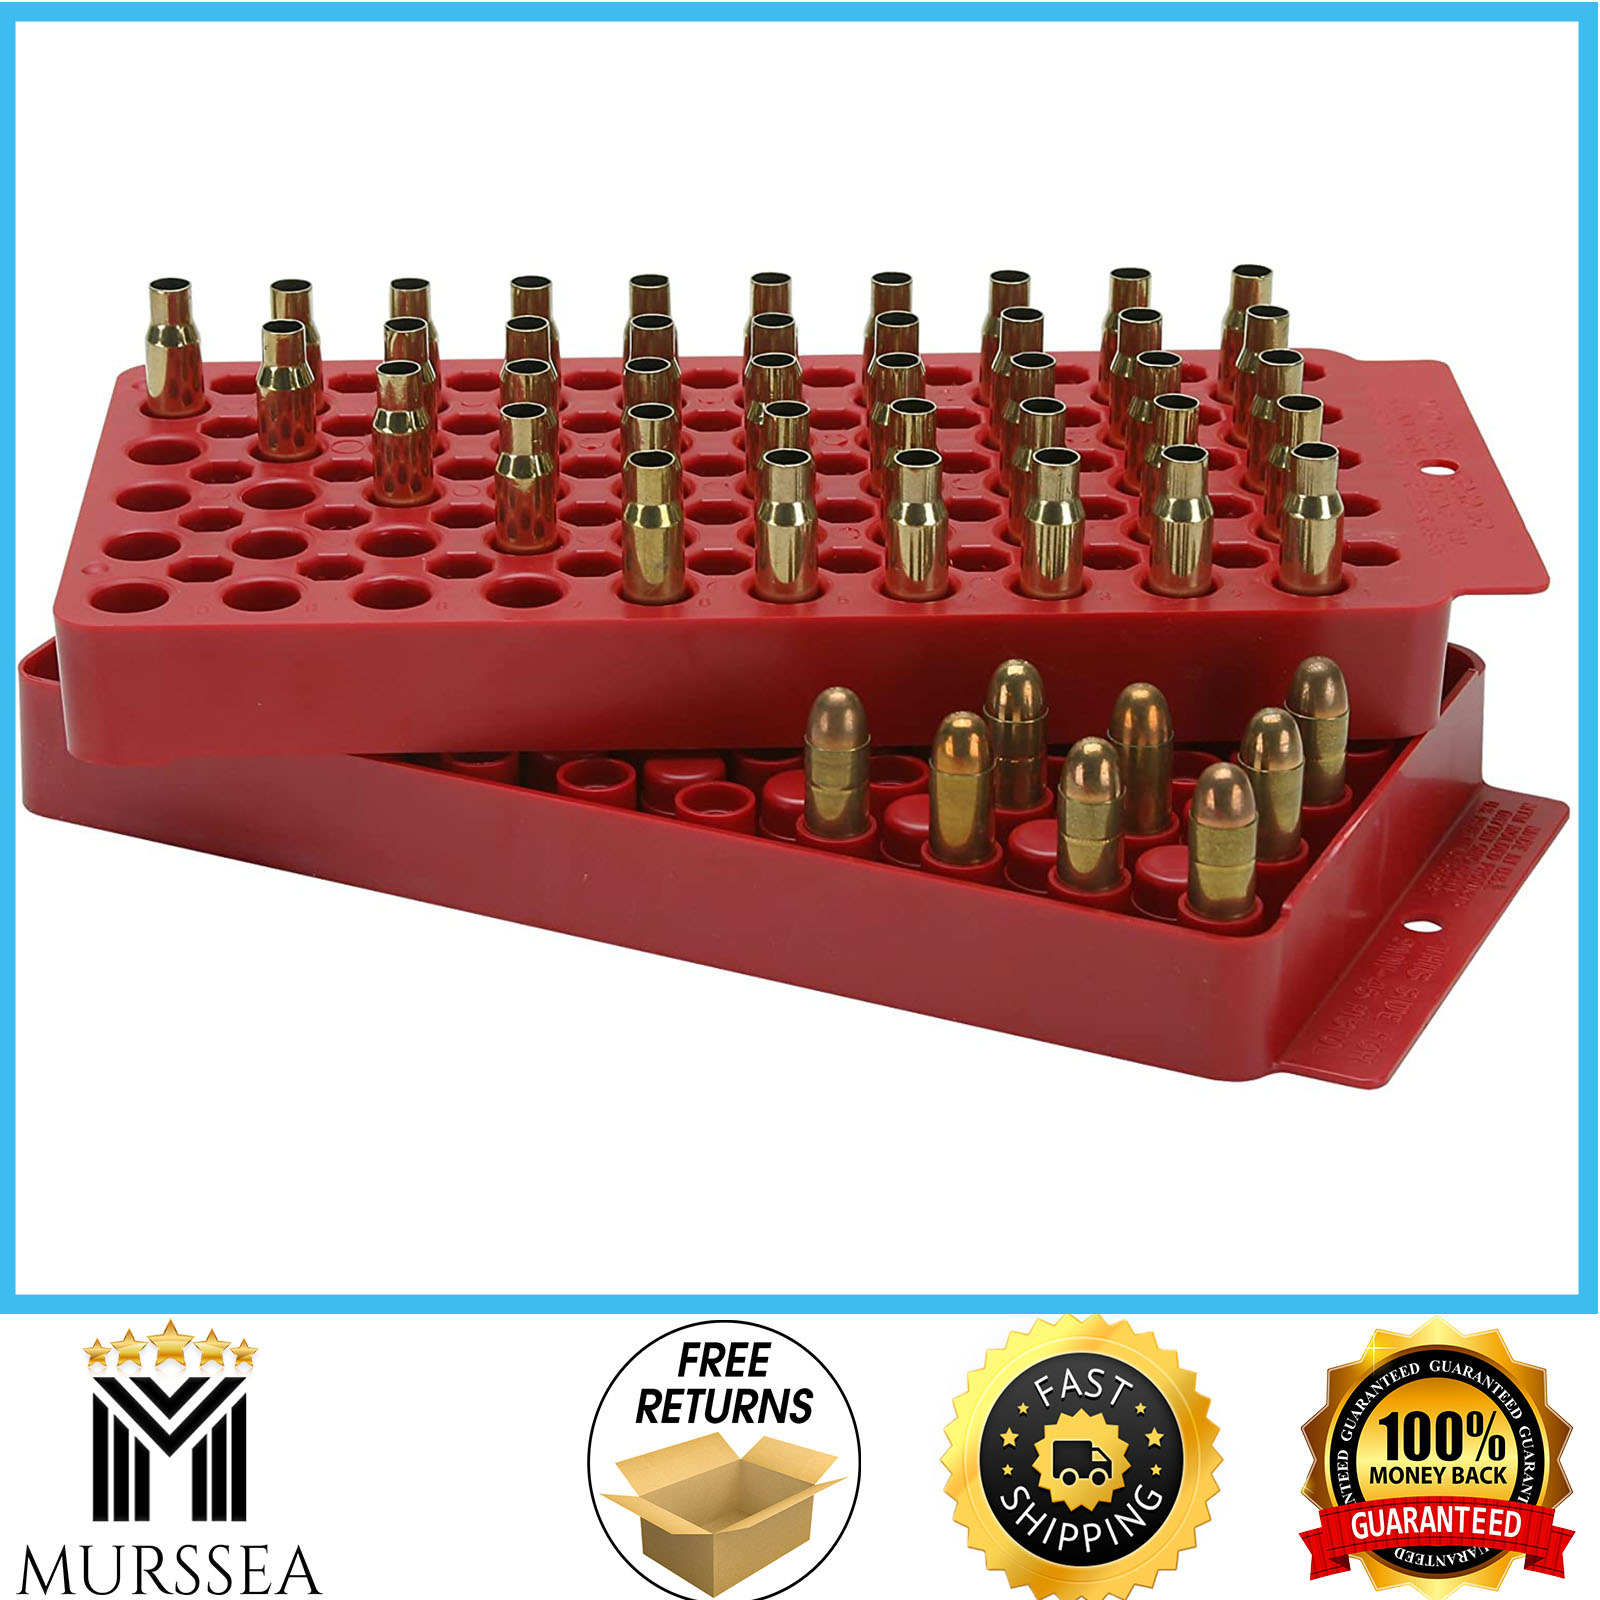 MTM Universal Ammo , two-sided Loading Tray Color Red (includes one tray)